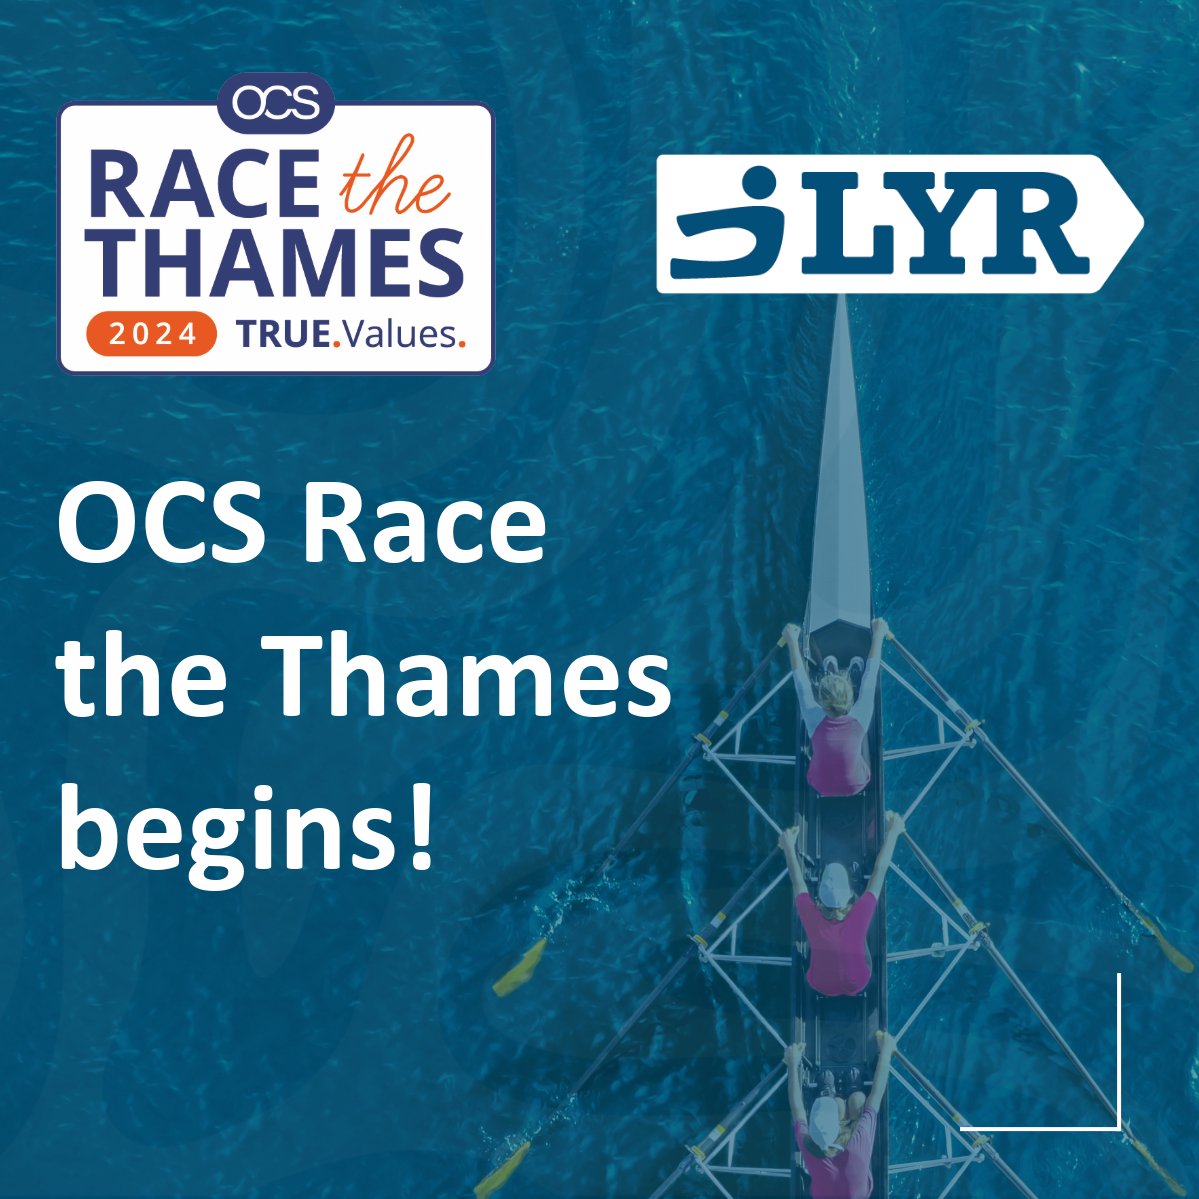 And they are off! We're so grateful to the team at OCS for setting up and taking on their own Race The Thames challenge, taking place over the next week. Over 40 teams across the world, with a fundraising total of around £14k currently. Head over to our LinkedIn for updates.